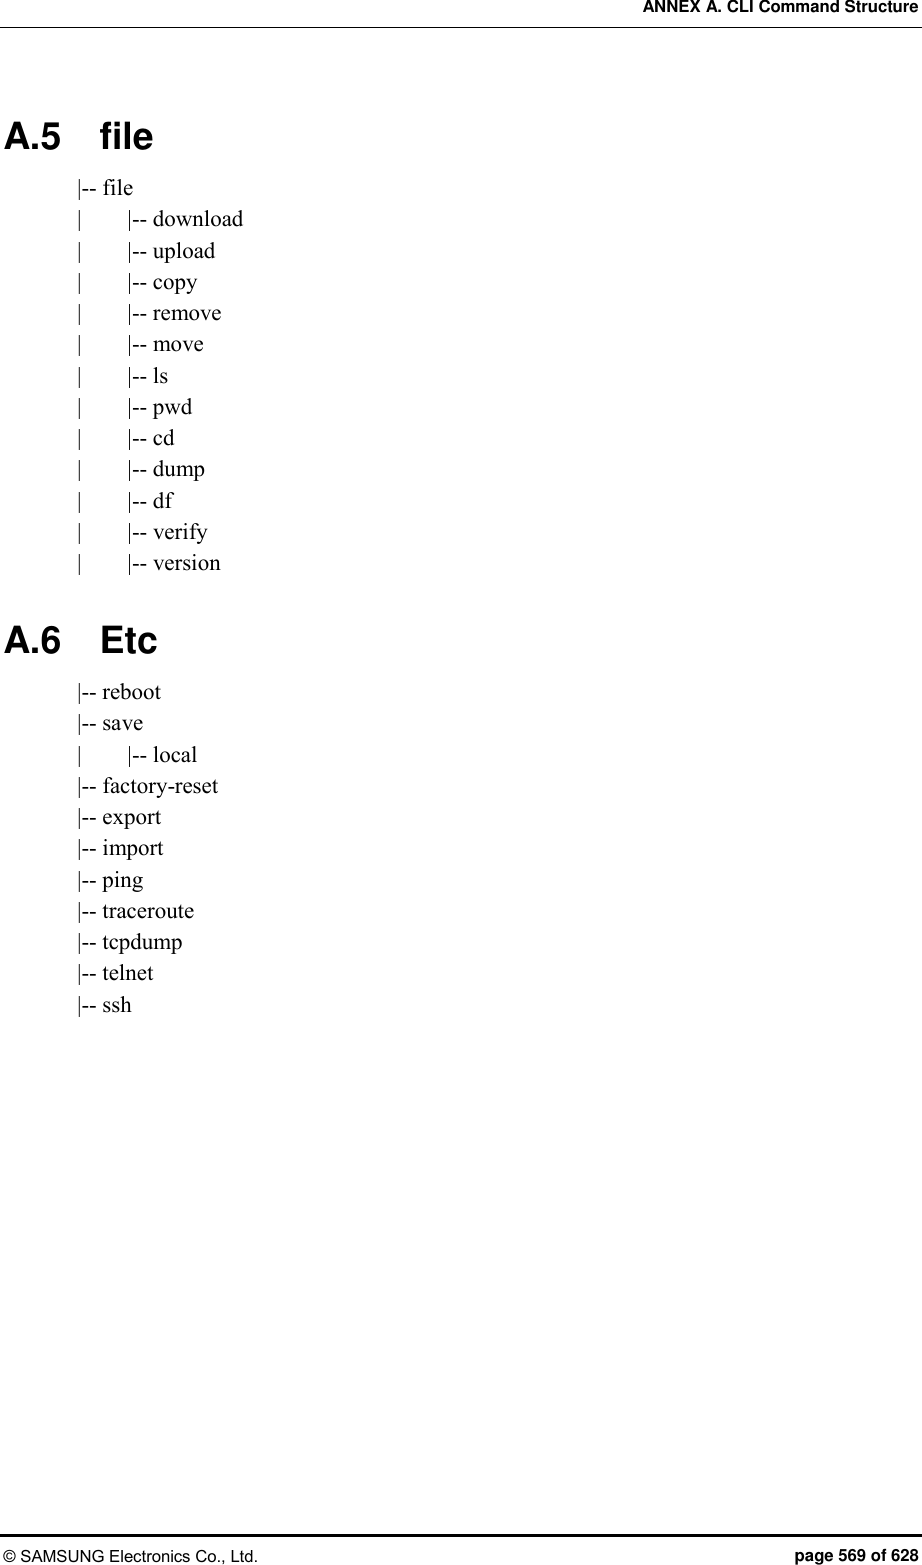 ANNEX A. CLI Command Structure © SAMSUNG Electronics Co., Ltd.  page 569 of 628 A.5  file |-- file |        |-- download |        |-- upload |        |-- copy |        |-- remove |        |-- move |        |-- ls |        |-- pwd |        |-- cd |        |-- dump |        |-- df |        |-- verify |        |-- version  A.6  Etc |-- reboot |-- save |        |-- local |-- factory-reset |-- export |-- import |-- ping |-- traceroute |-- tcpdump |-- telnet |-- ssh     